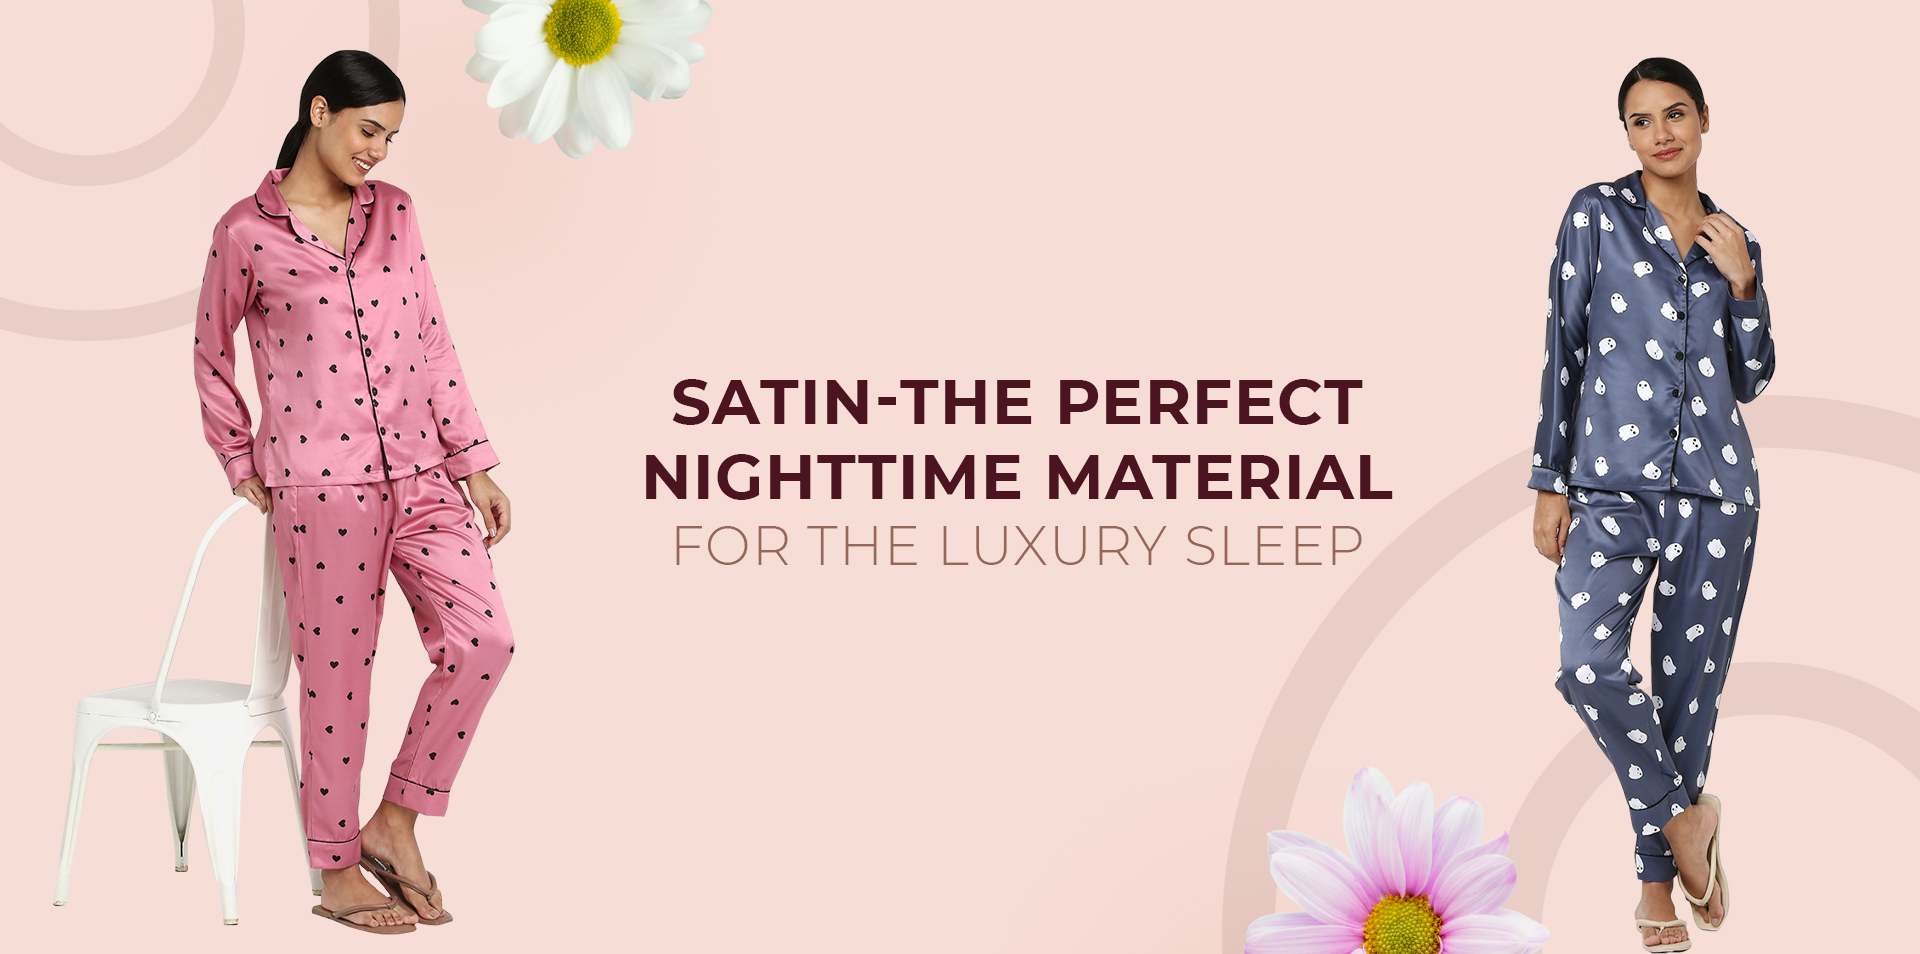 Satin- The Perfect Night suits Material for Luxury Sleep